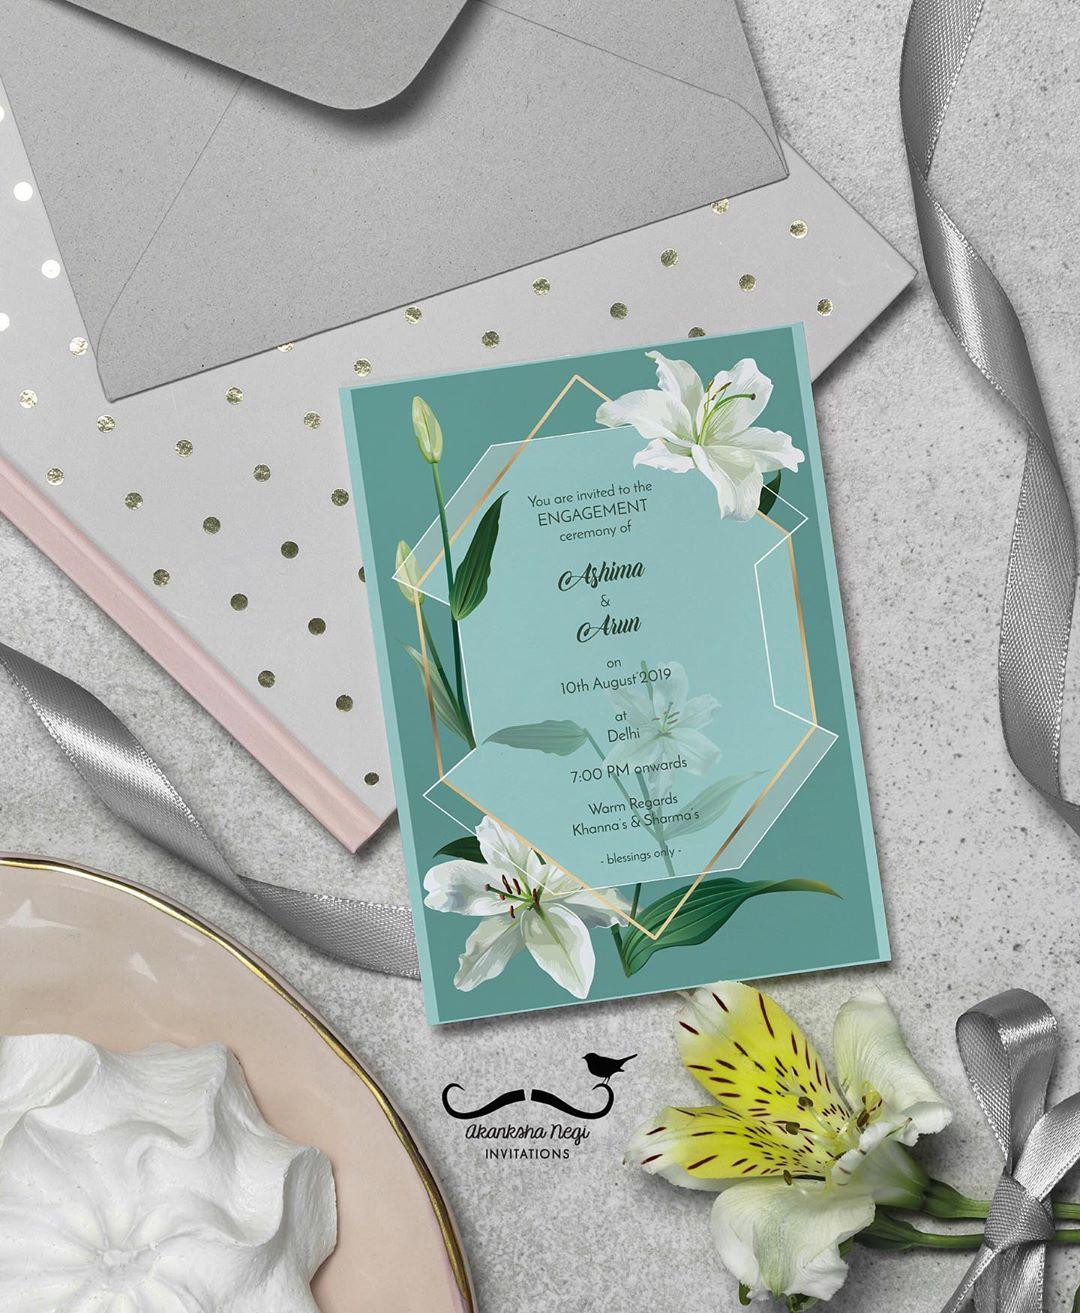 Creative Wedding Invitations Background Ideas for Your Big Day